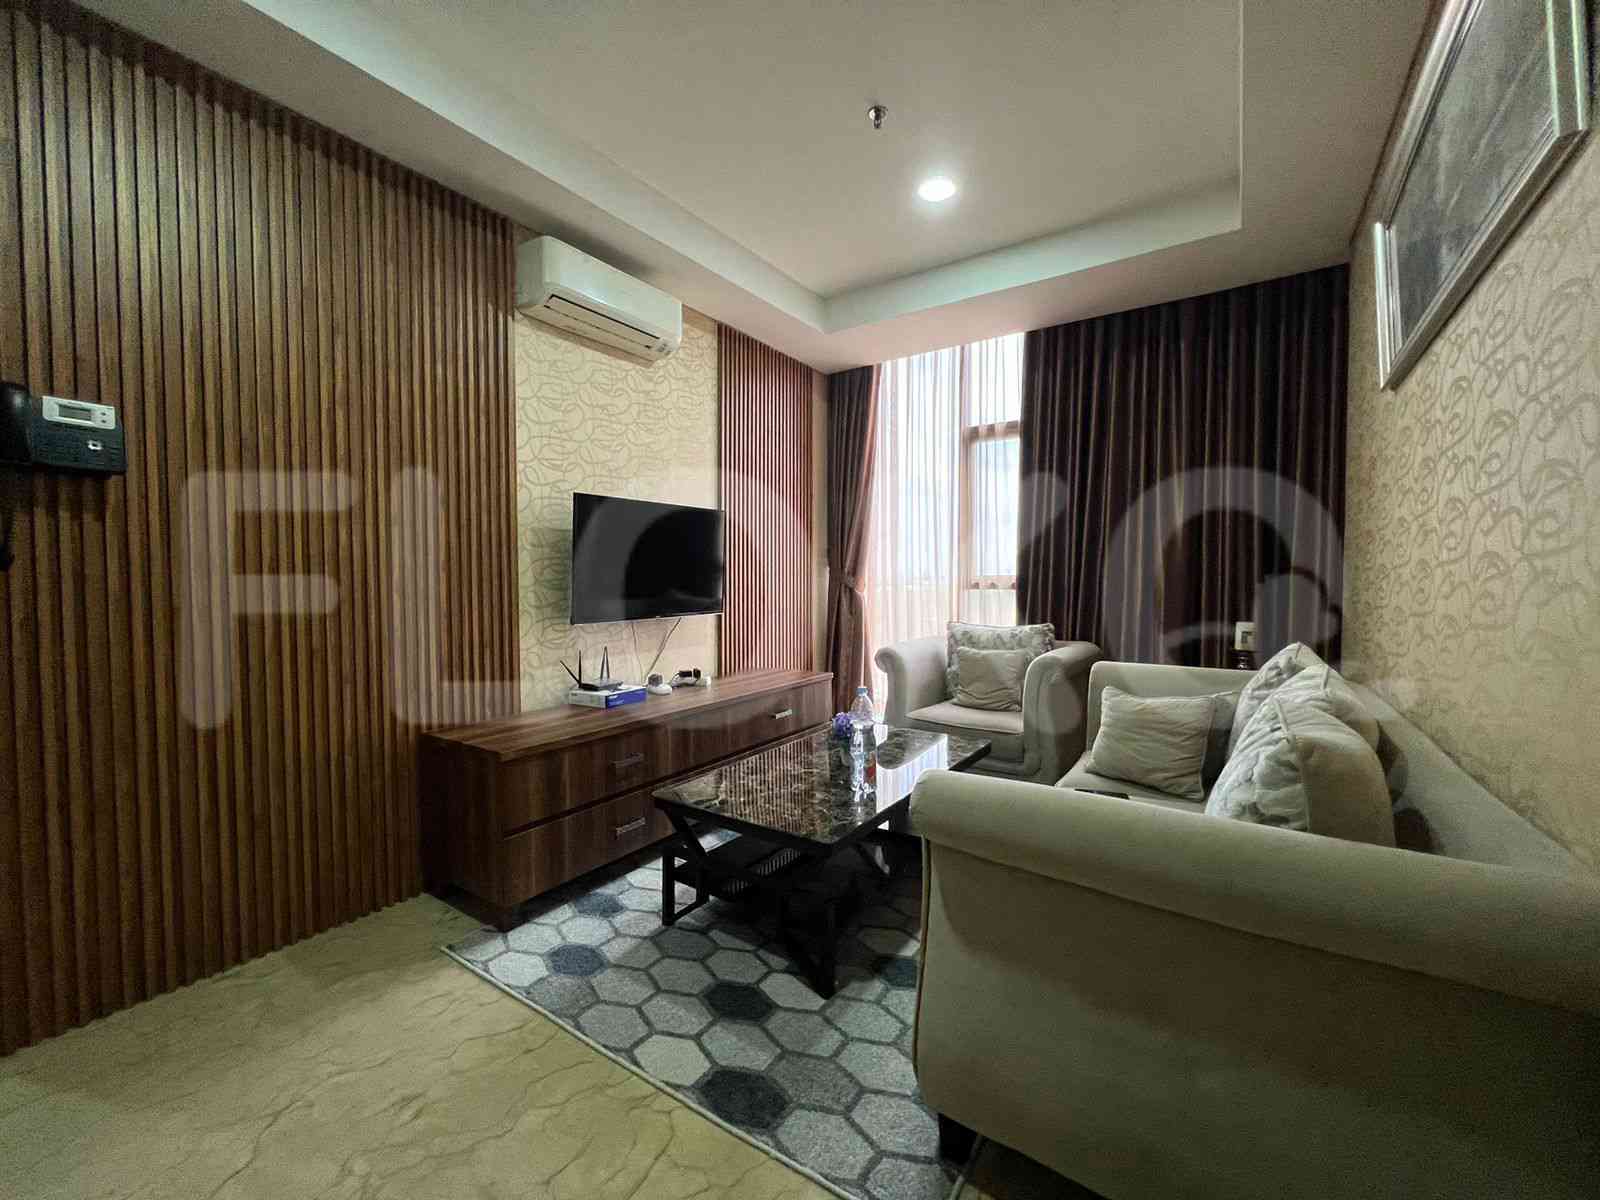 2 Bedroom on 15th Floor for Rent in Lavanue Apartment - fpa7f4 1